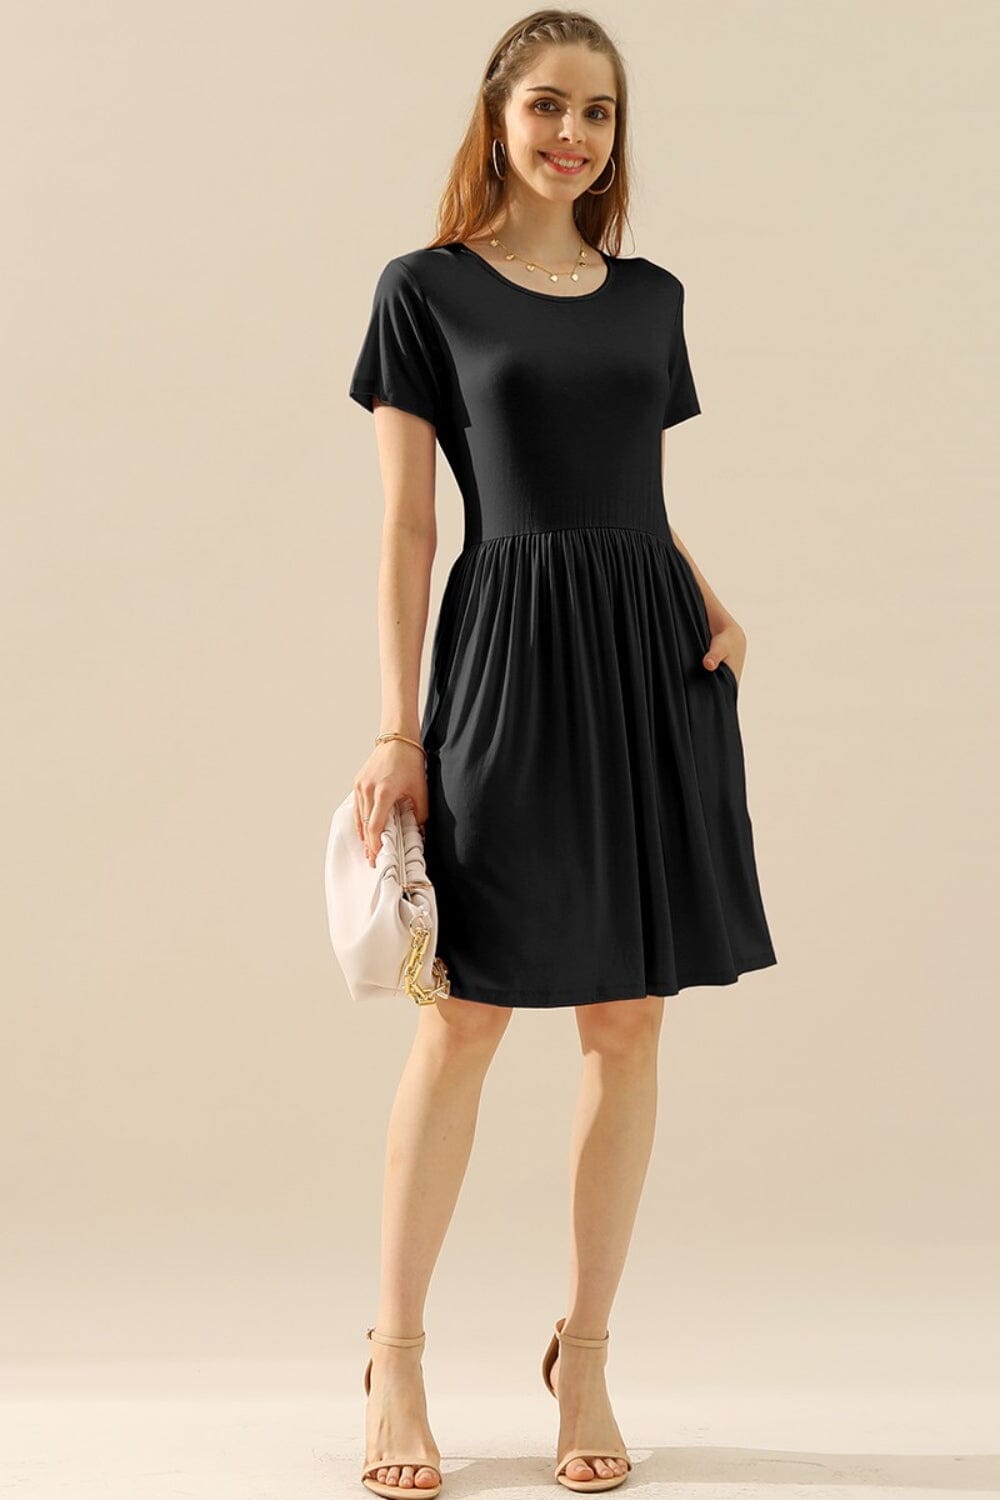 Ninexis Round Neck Ruched Dress with Pockets Dresses jehouze 